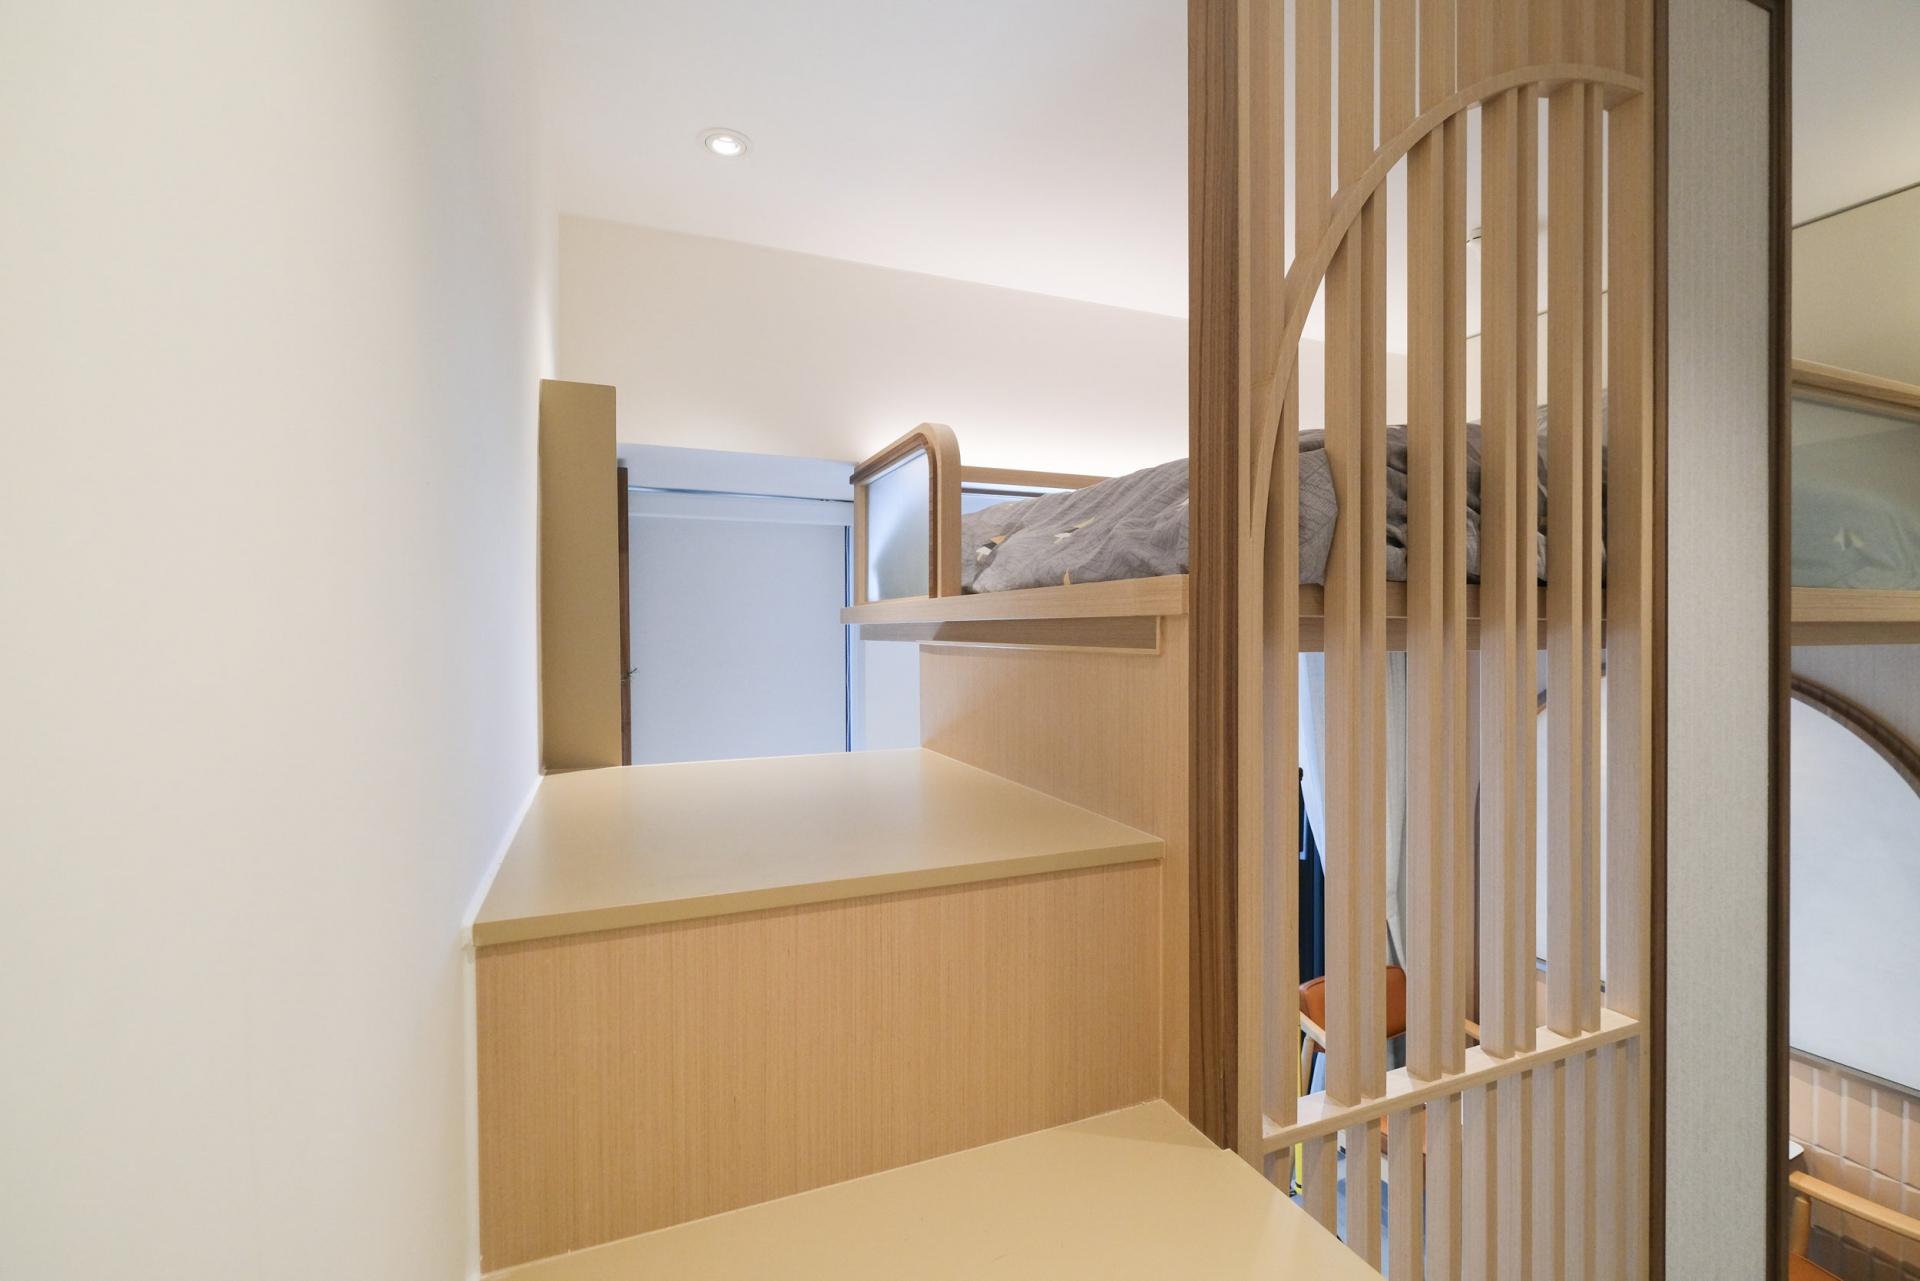 This 200 sq. ft. Kowloon Flat Imbued with Italian Charm is Home to a Woman and Her Cat